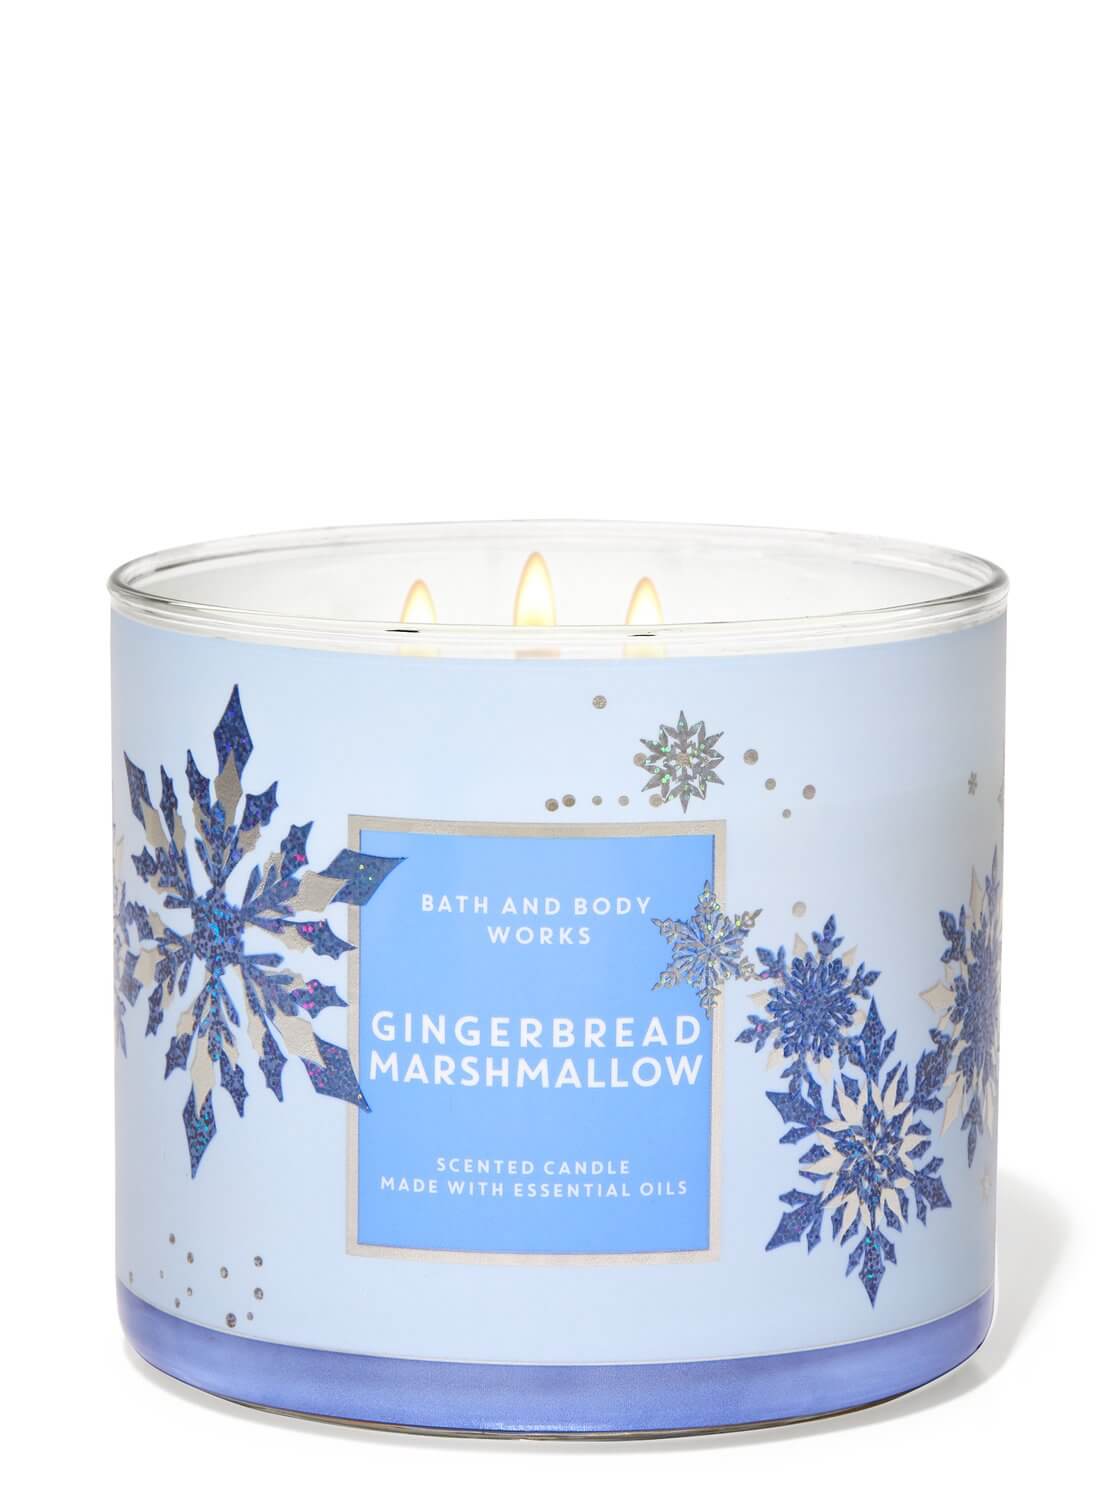 Bath & Body works Gingerbread Marshmallow 3-Wick Candle